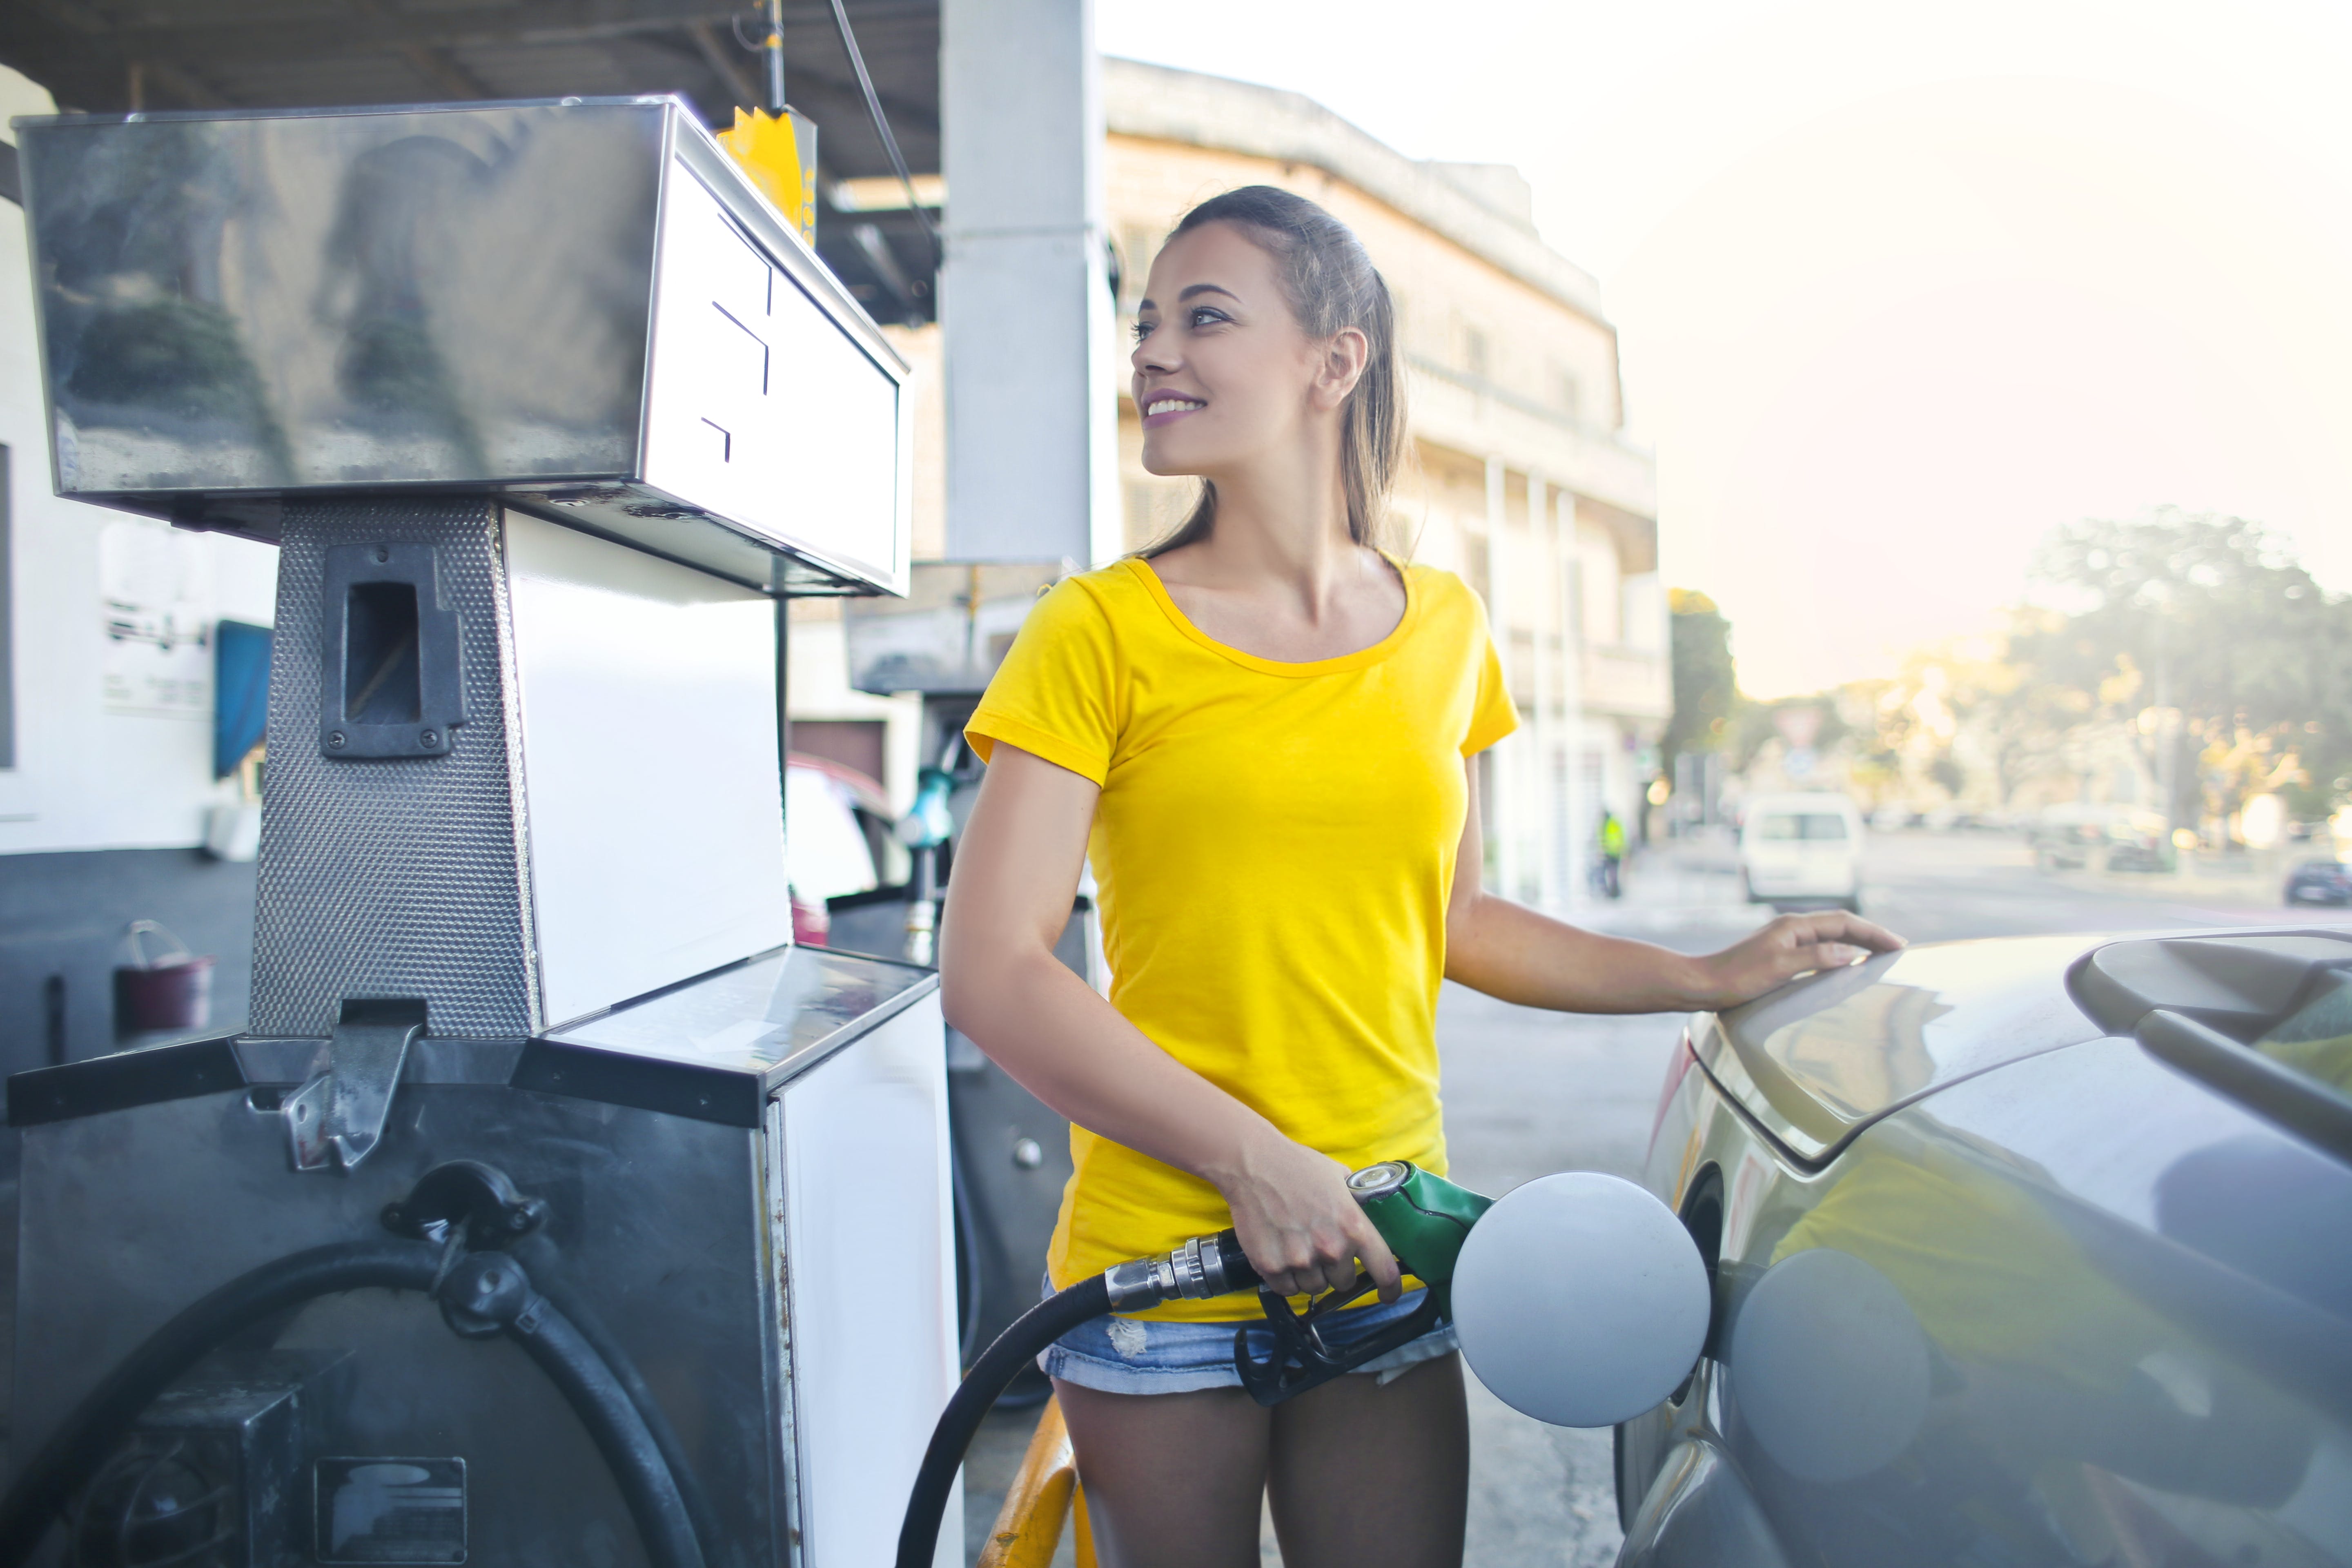 A woman in a yellow top fueling her car. | Source: Pexels